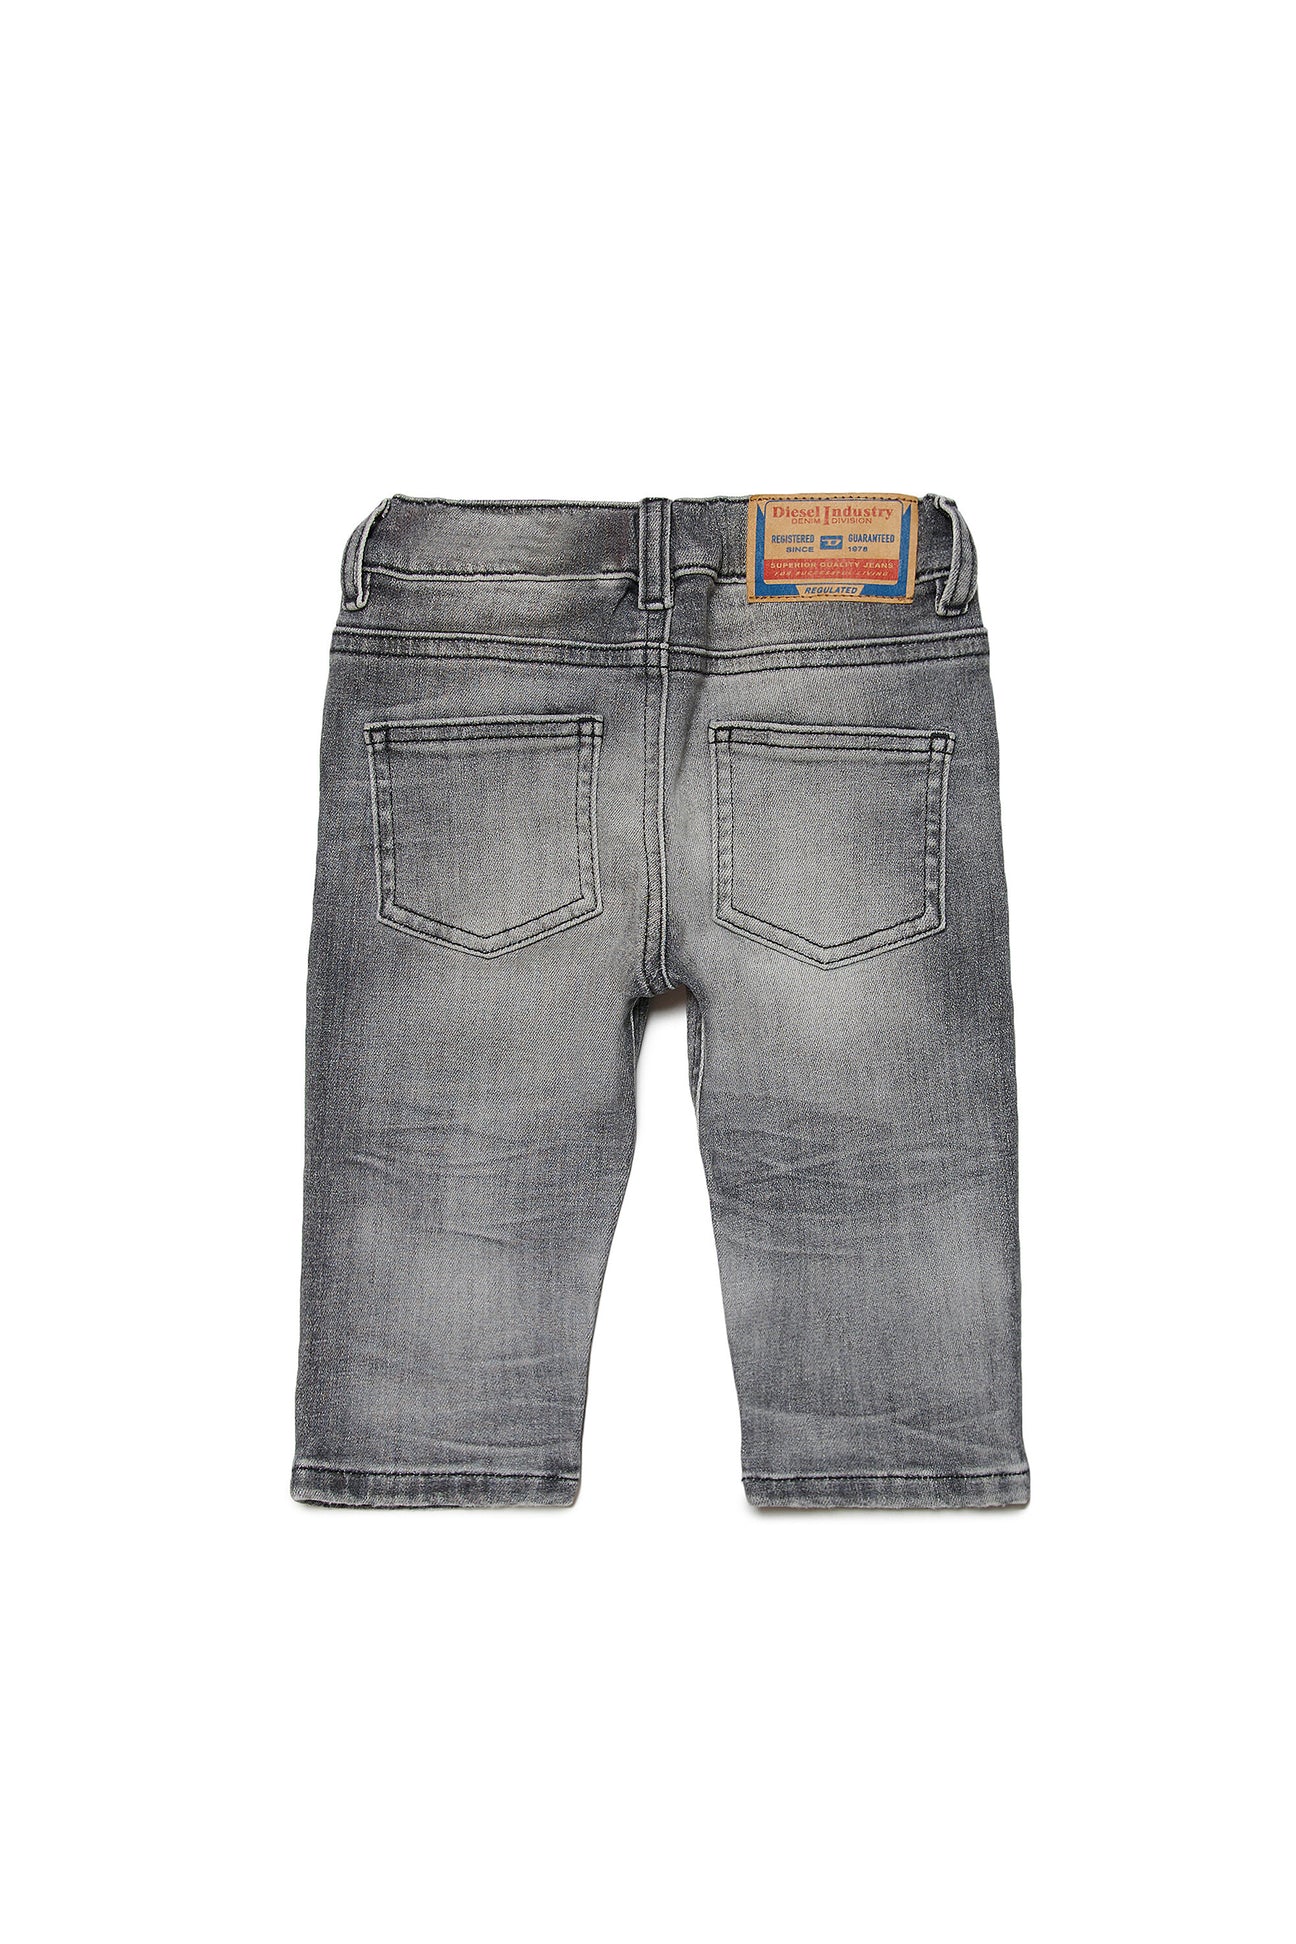 Shaded gray regular jeans - D-Gale-B Shaded gray regular jeans - D-Gale-B